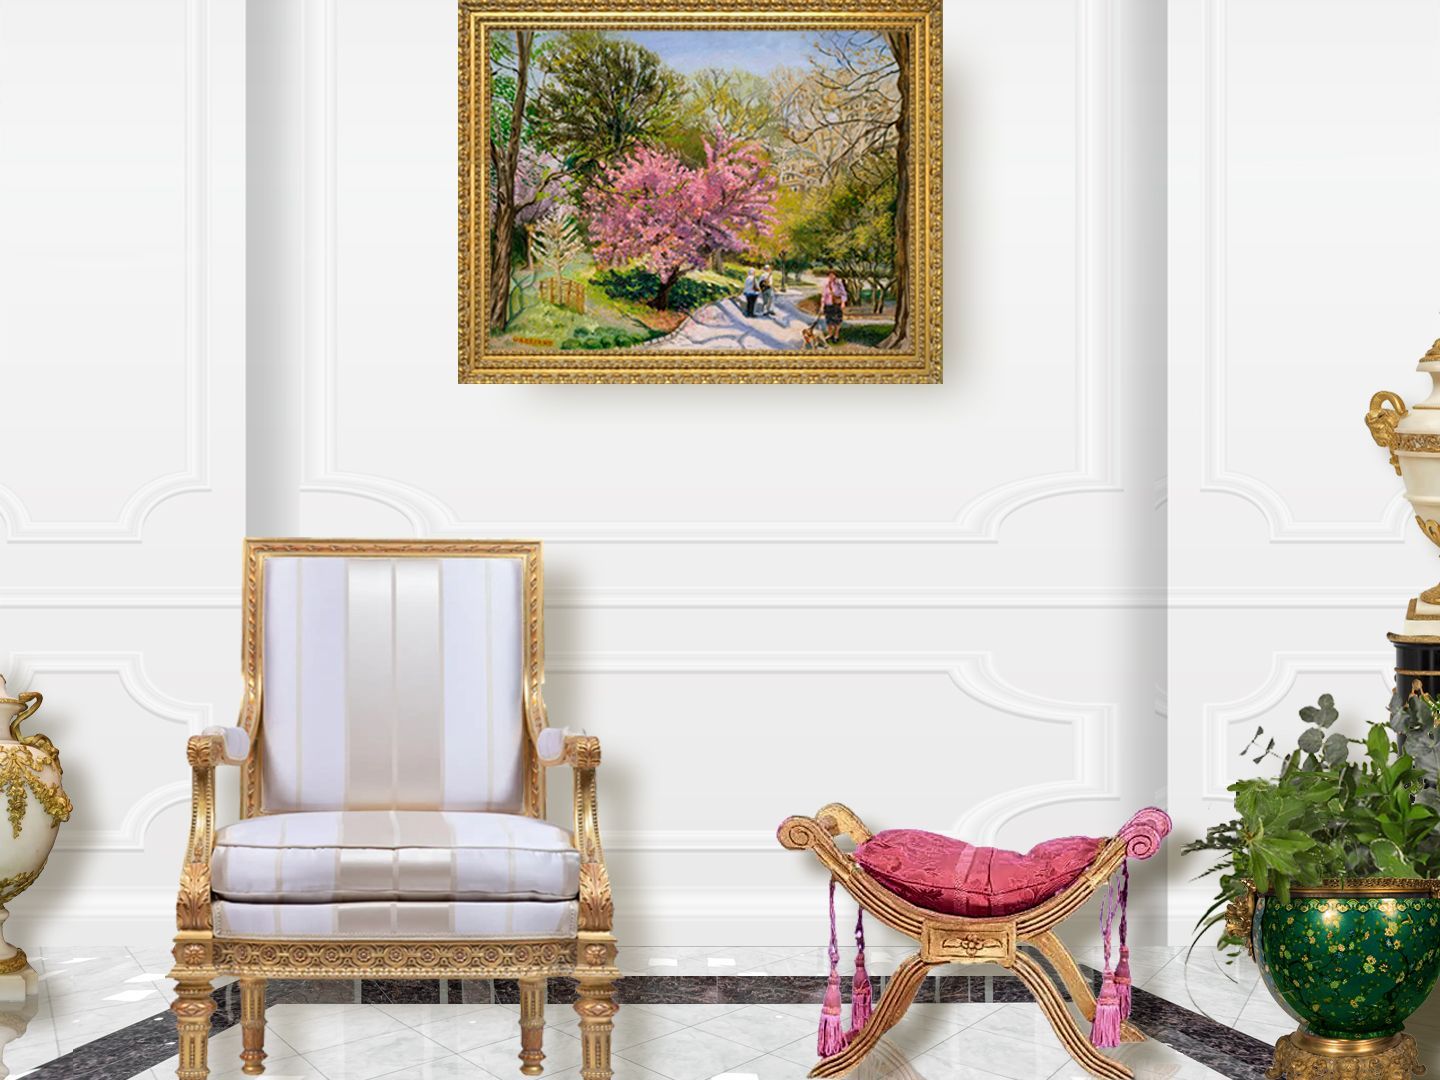 Cherry Blossom | Landscape Oil Painting by John Varriano